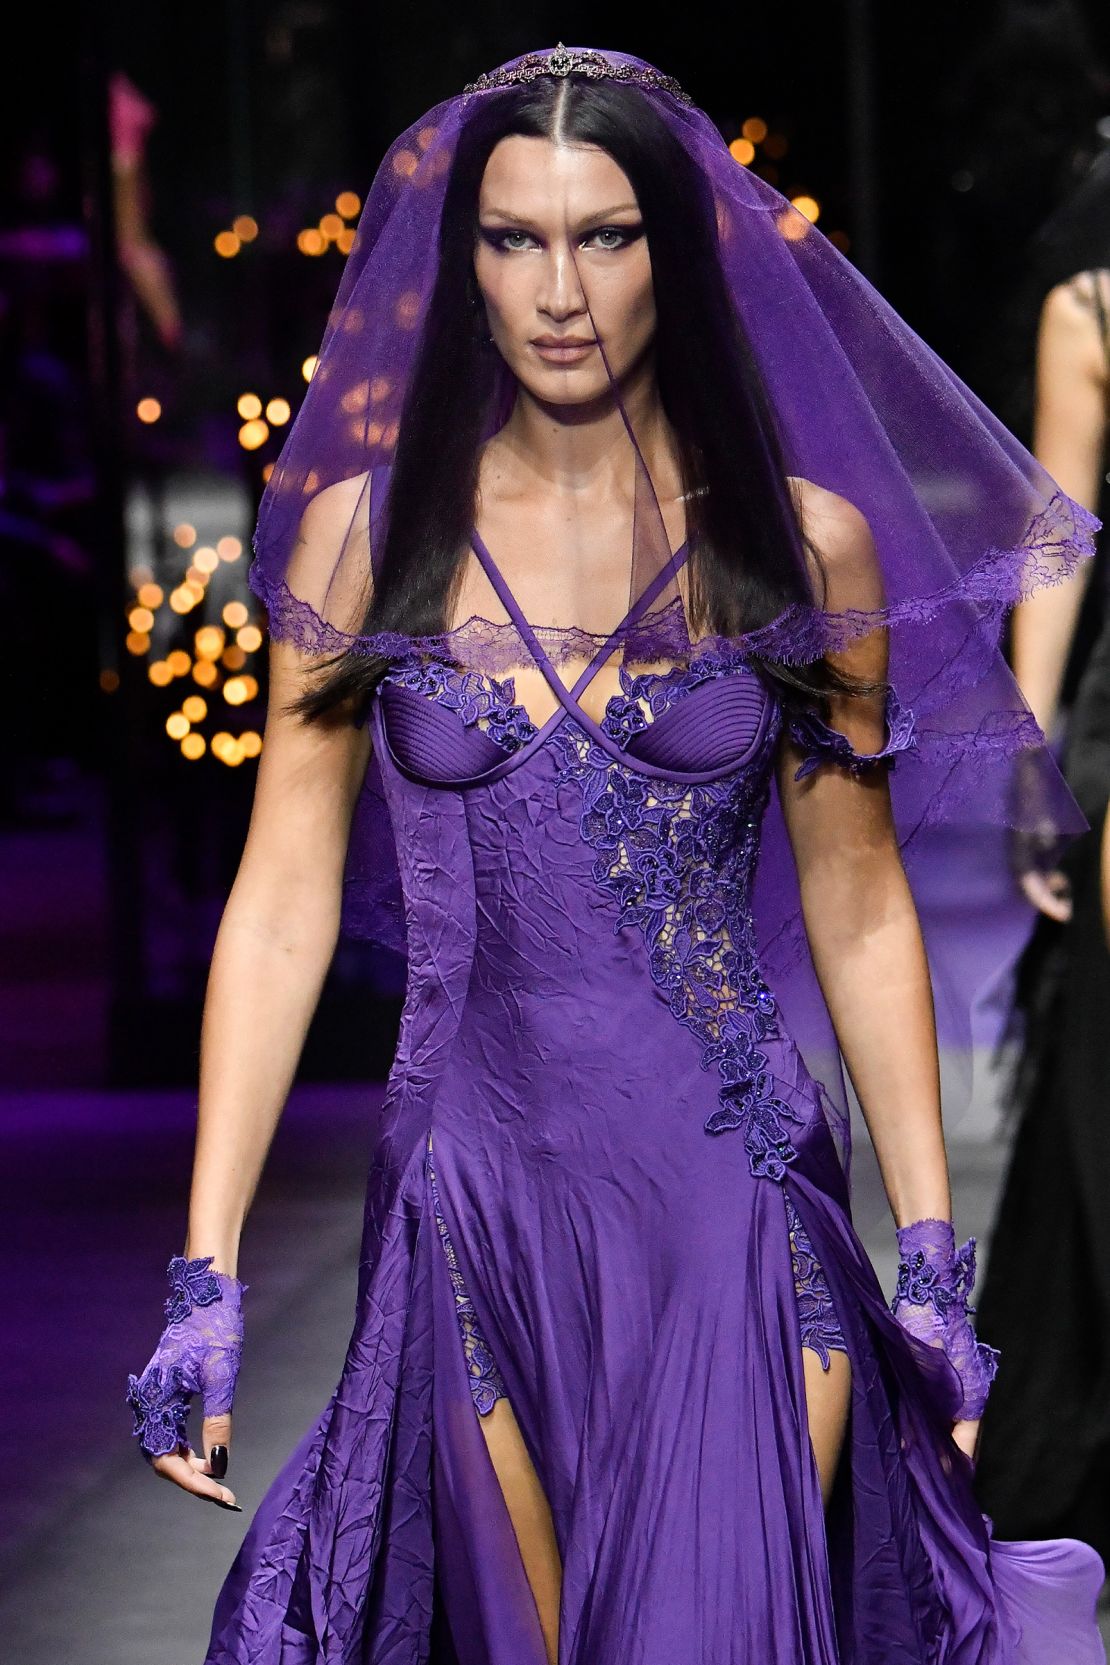 Bella Hadid made an appearance in a gothic purple veil and corset.